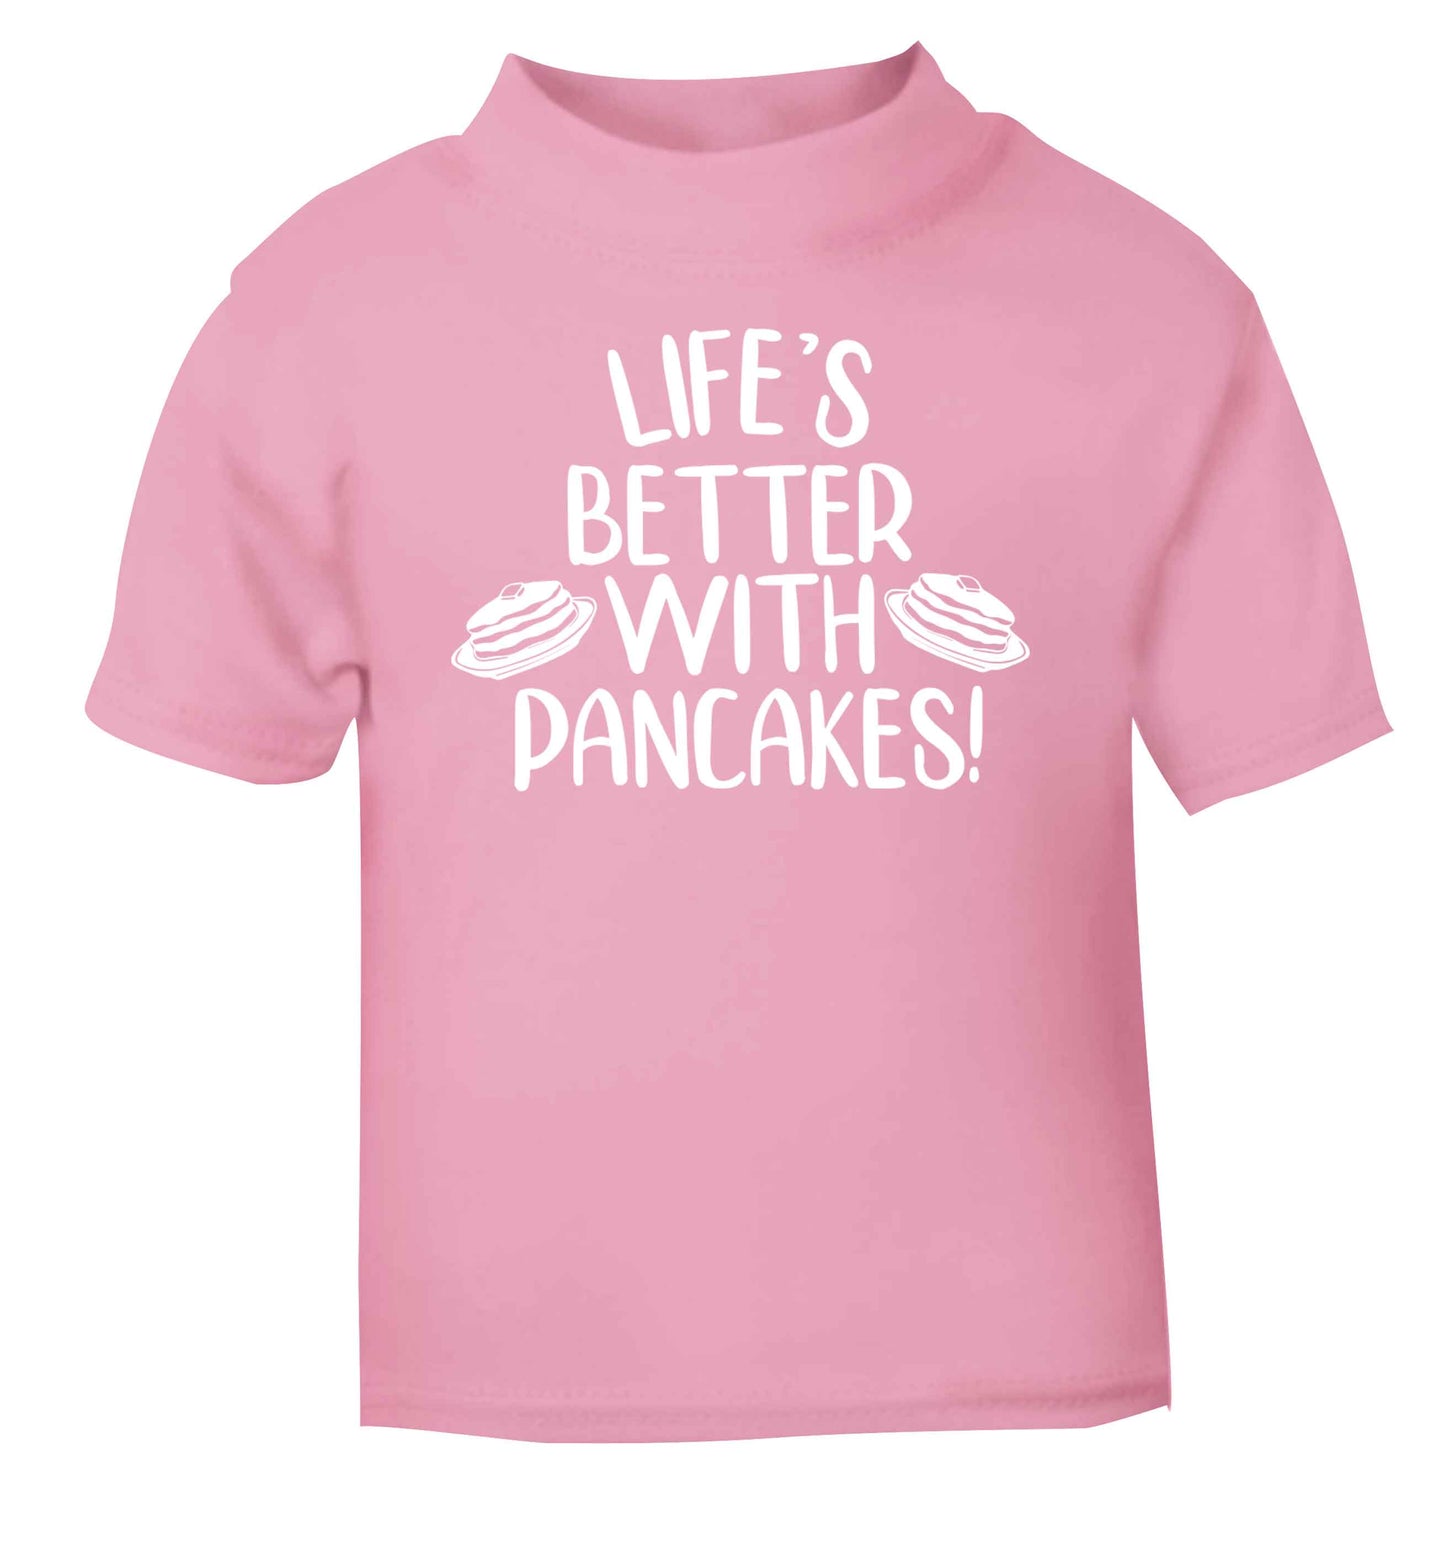 Life's better with pancakes light pink baby toddler Tshirt 2 Years